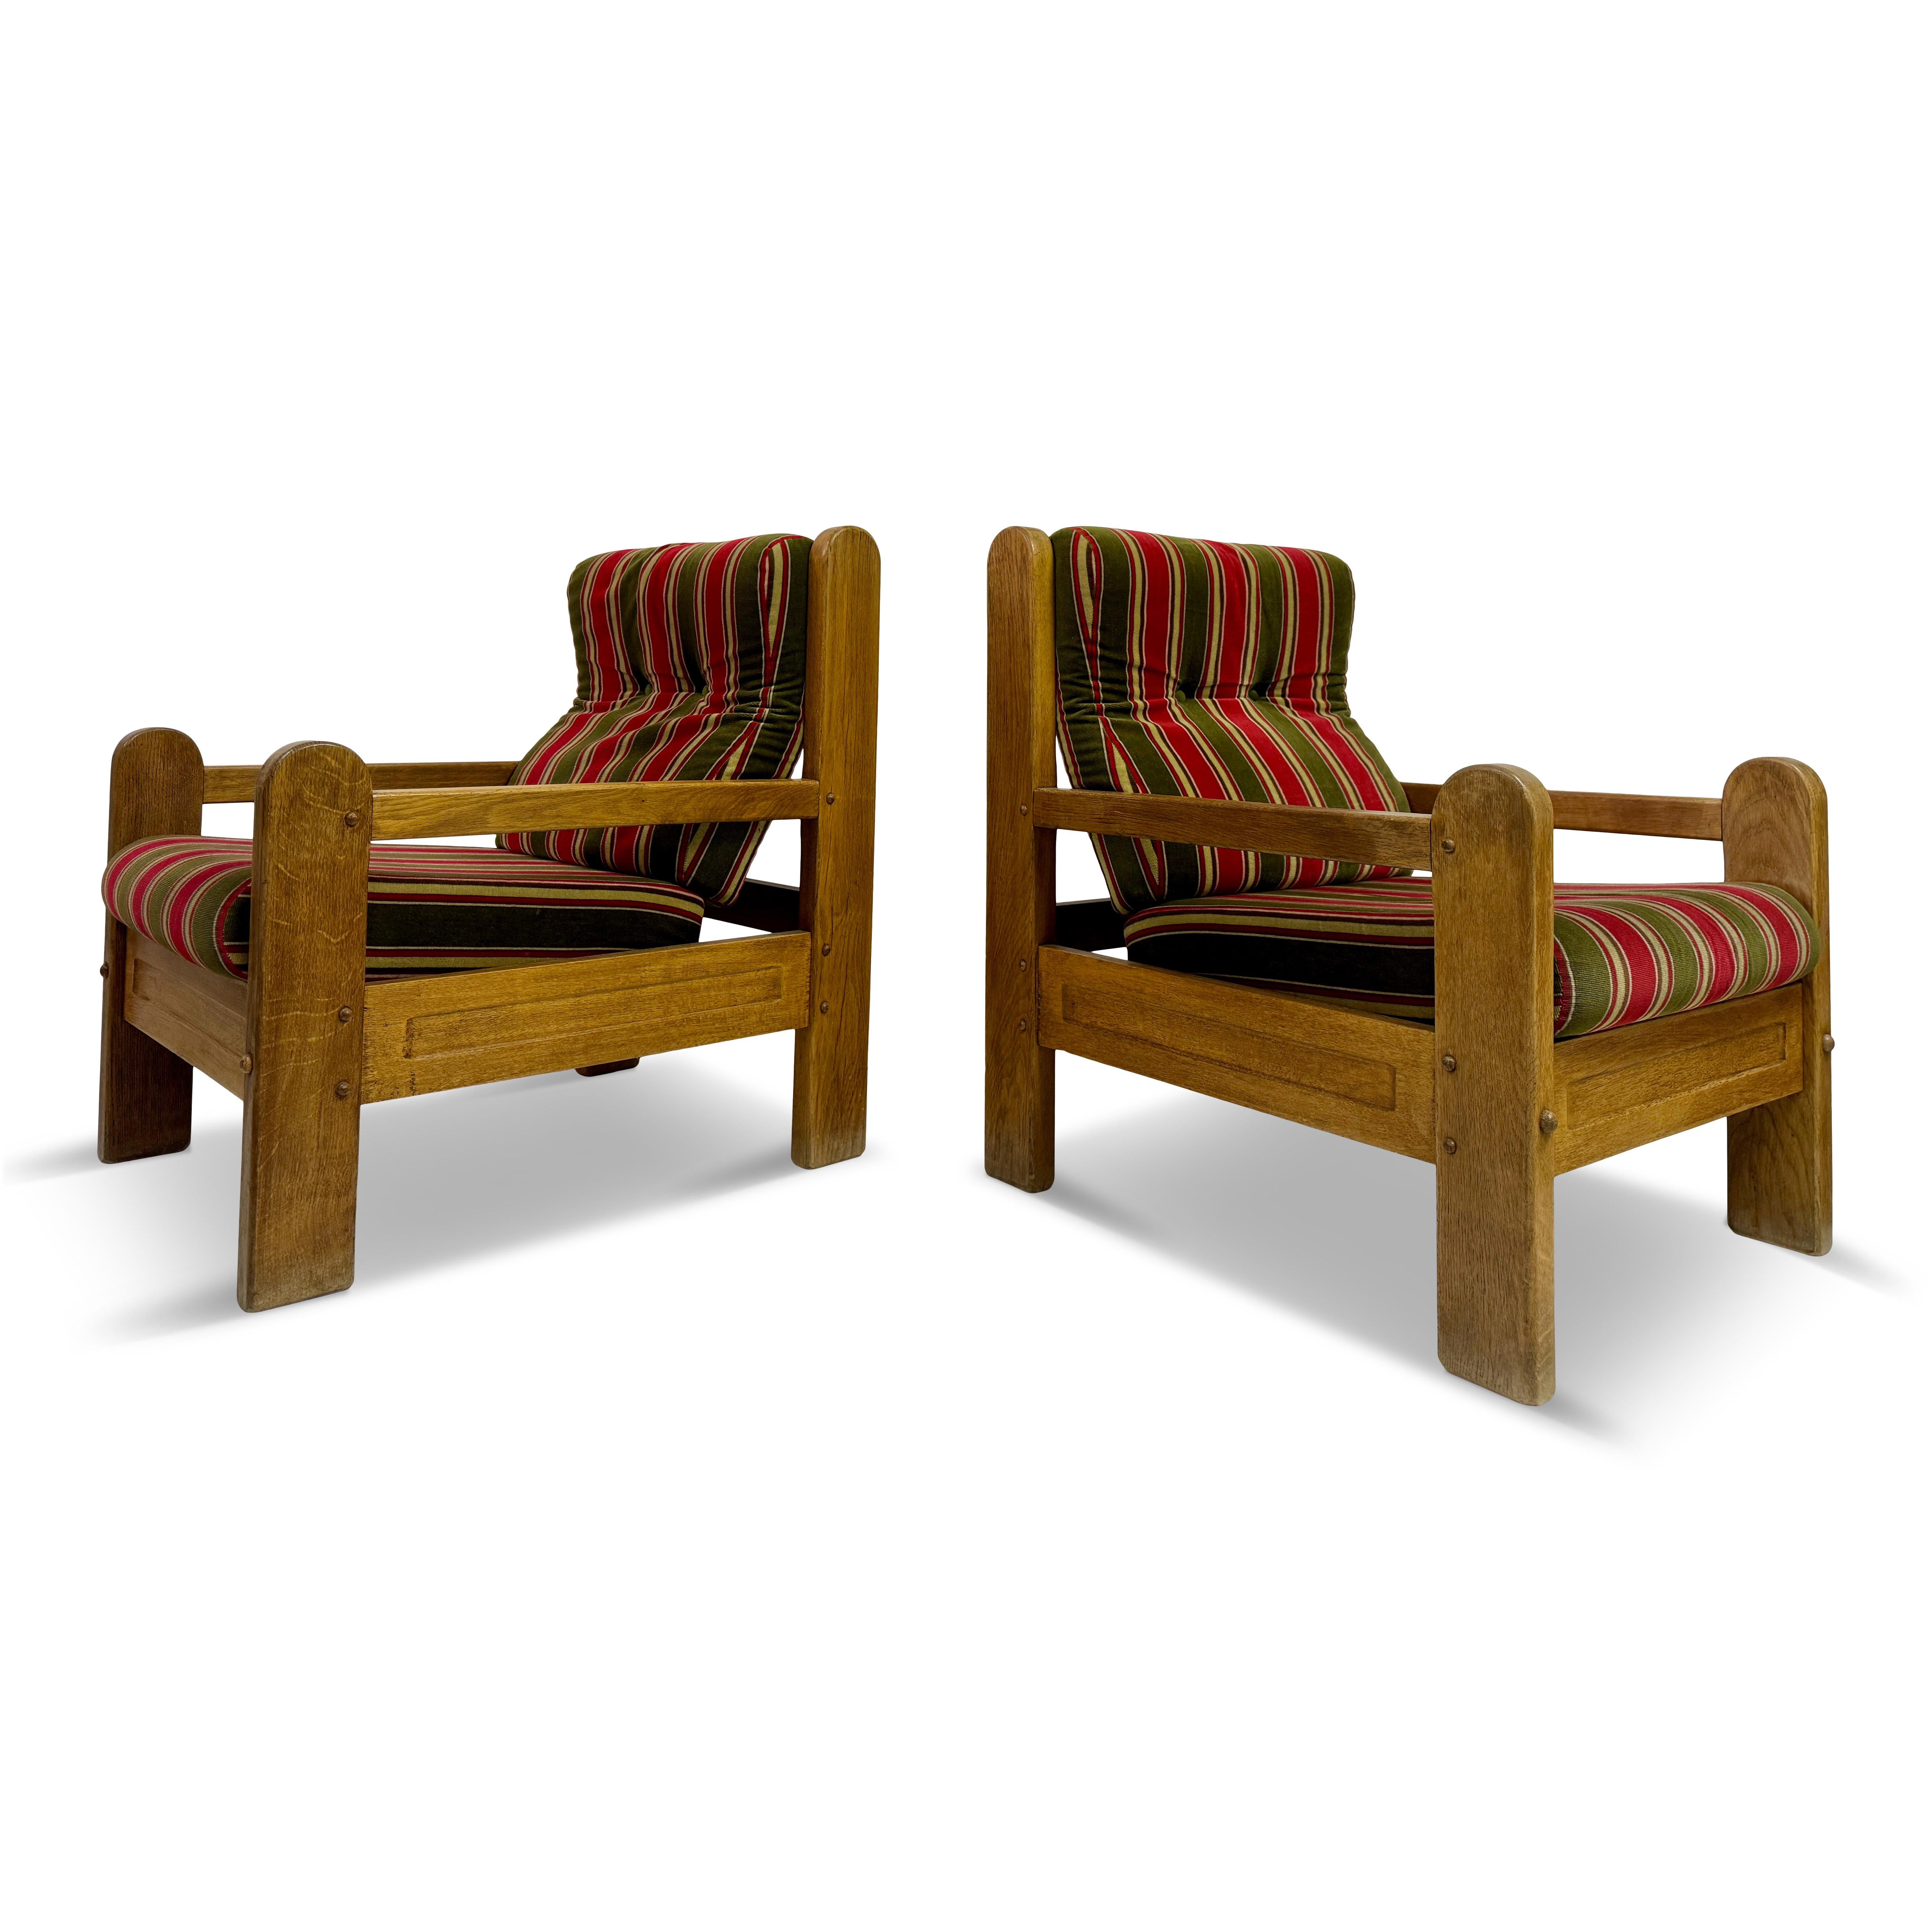 Pair of armchairs

Oak

Chunky shape

Slatted back

Original upholstery can be changed if required

Seat height 45cm

1960s/1970s